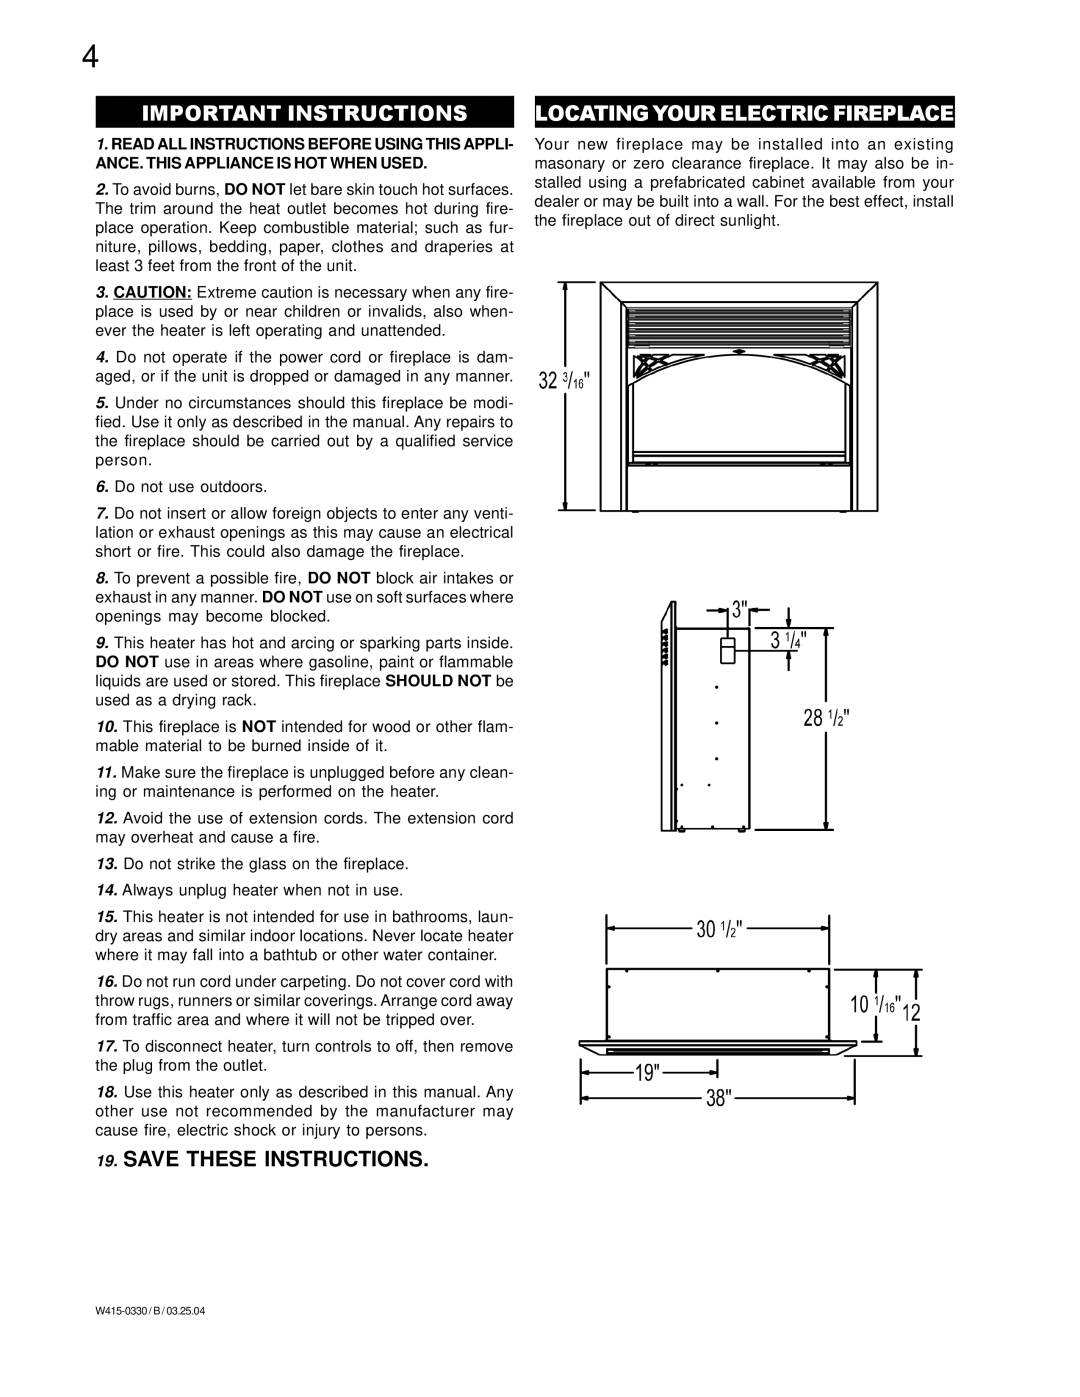 Napoleon Fireplaces EF38H manual Important Instructions, Locatingyour Electric Fireplace, Save These Instructions 